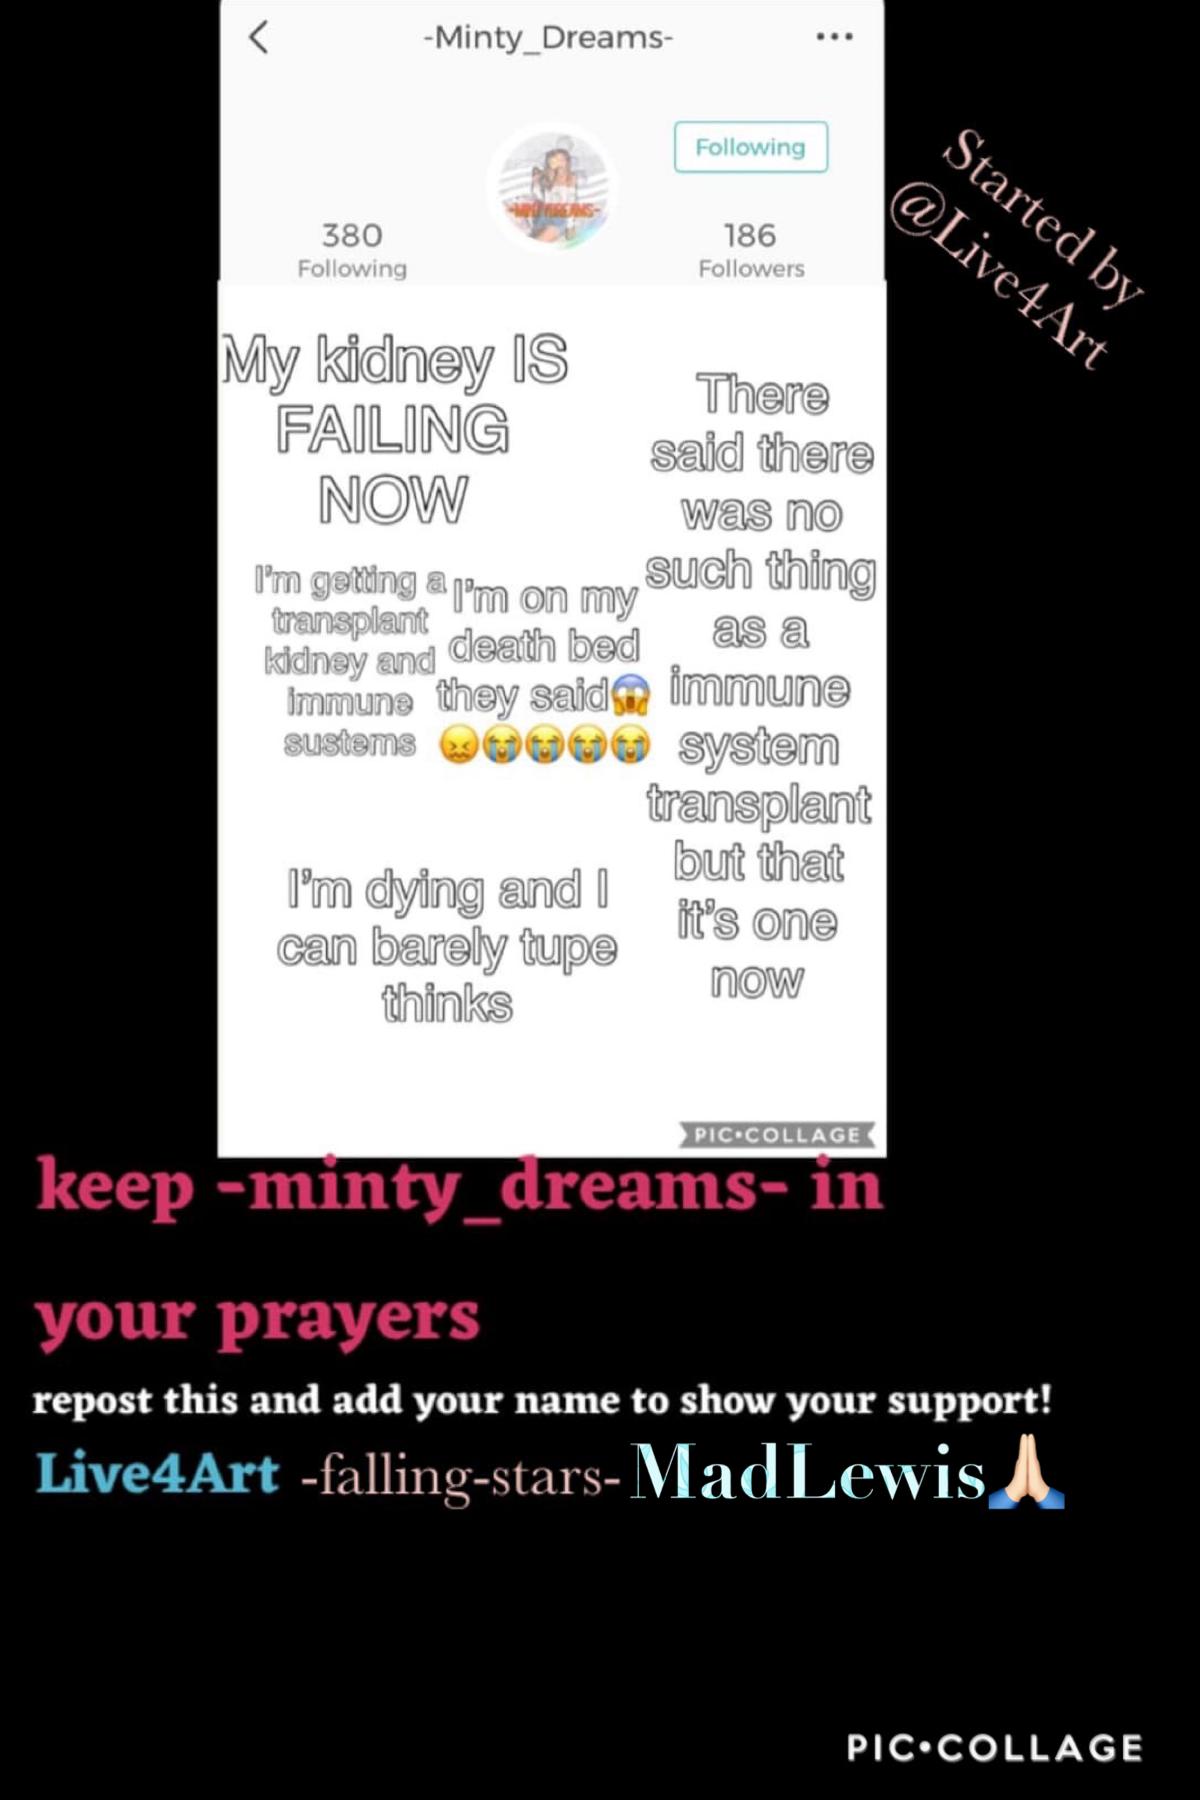 Repost for minty dreams 